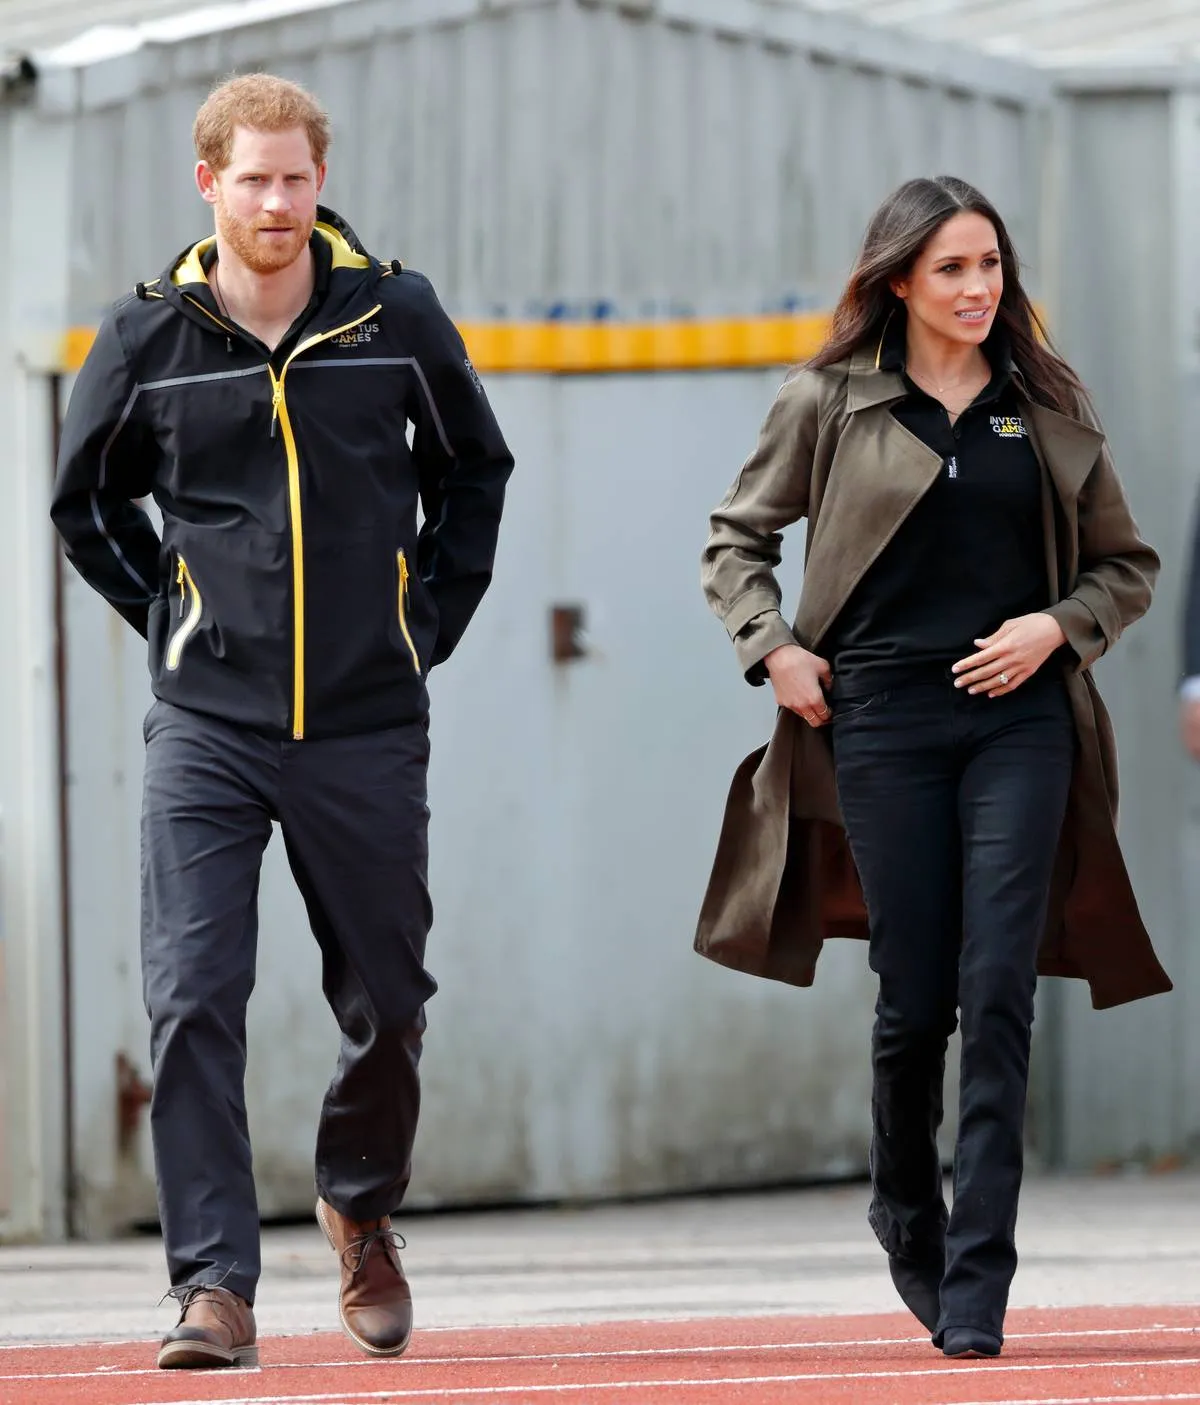 Meghan Markle wears casual exercise clothes for the UK Team Trials in 2018.